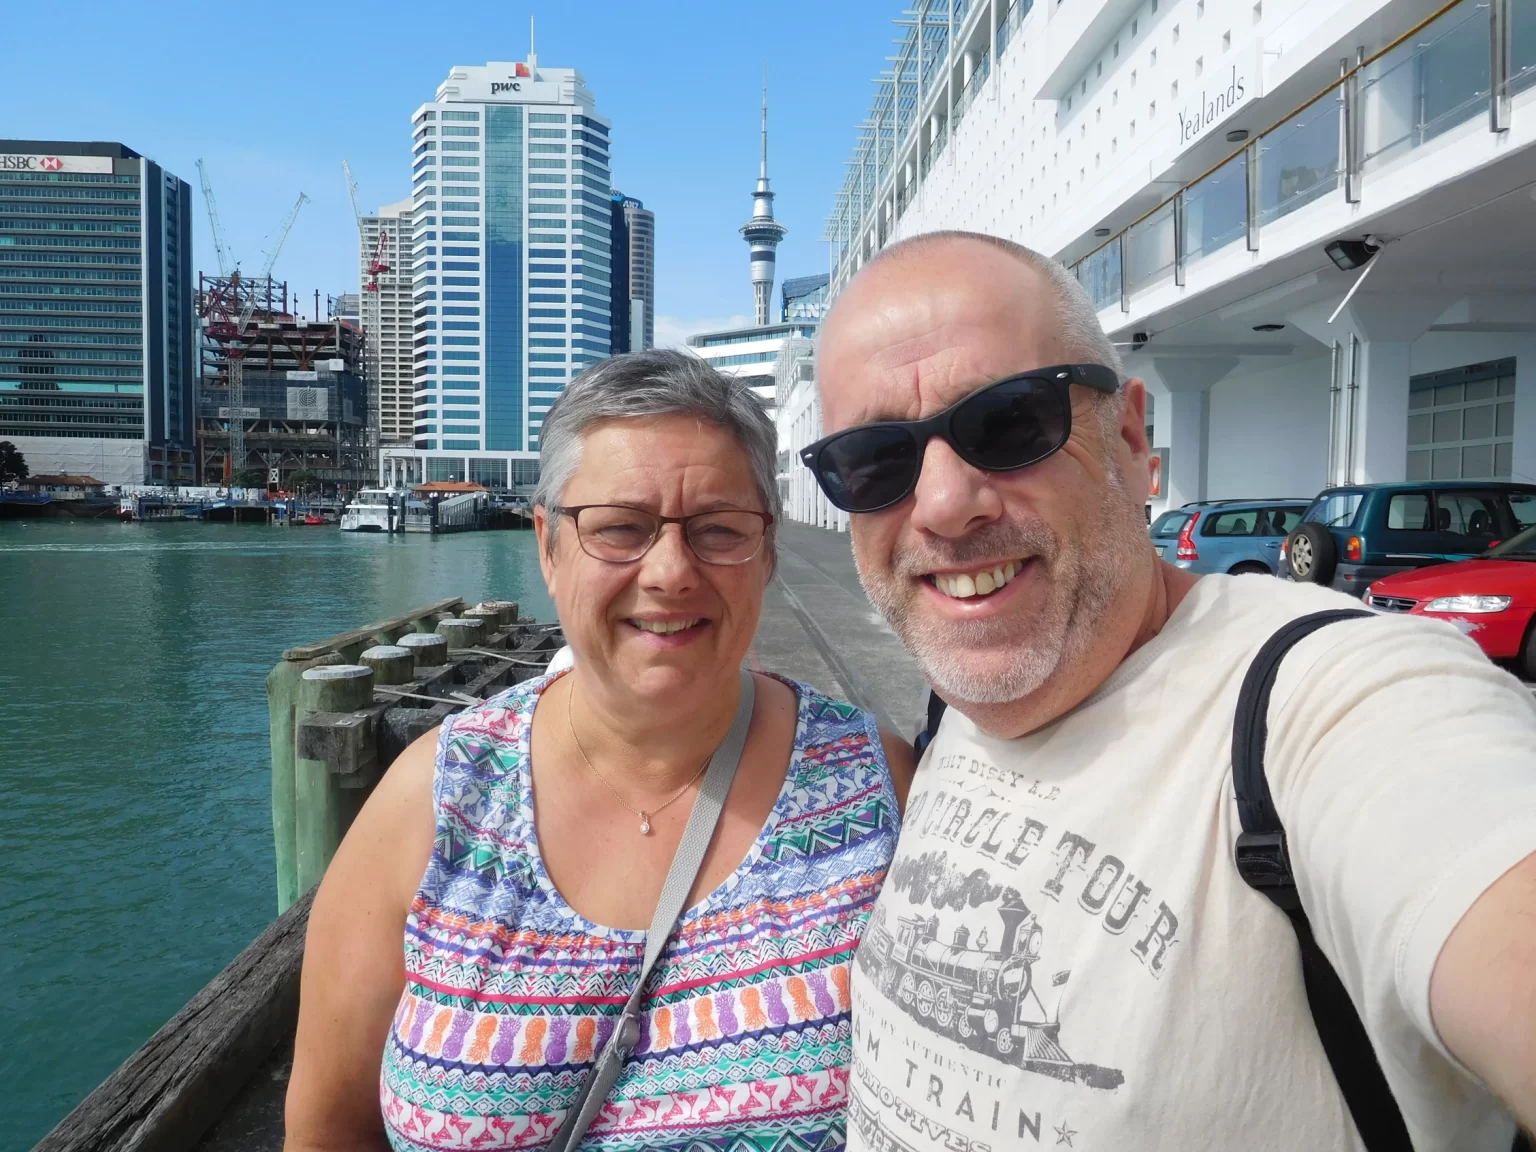 Sky Auckland – A Day of Ups and Downs